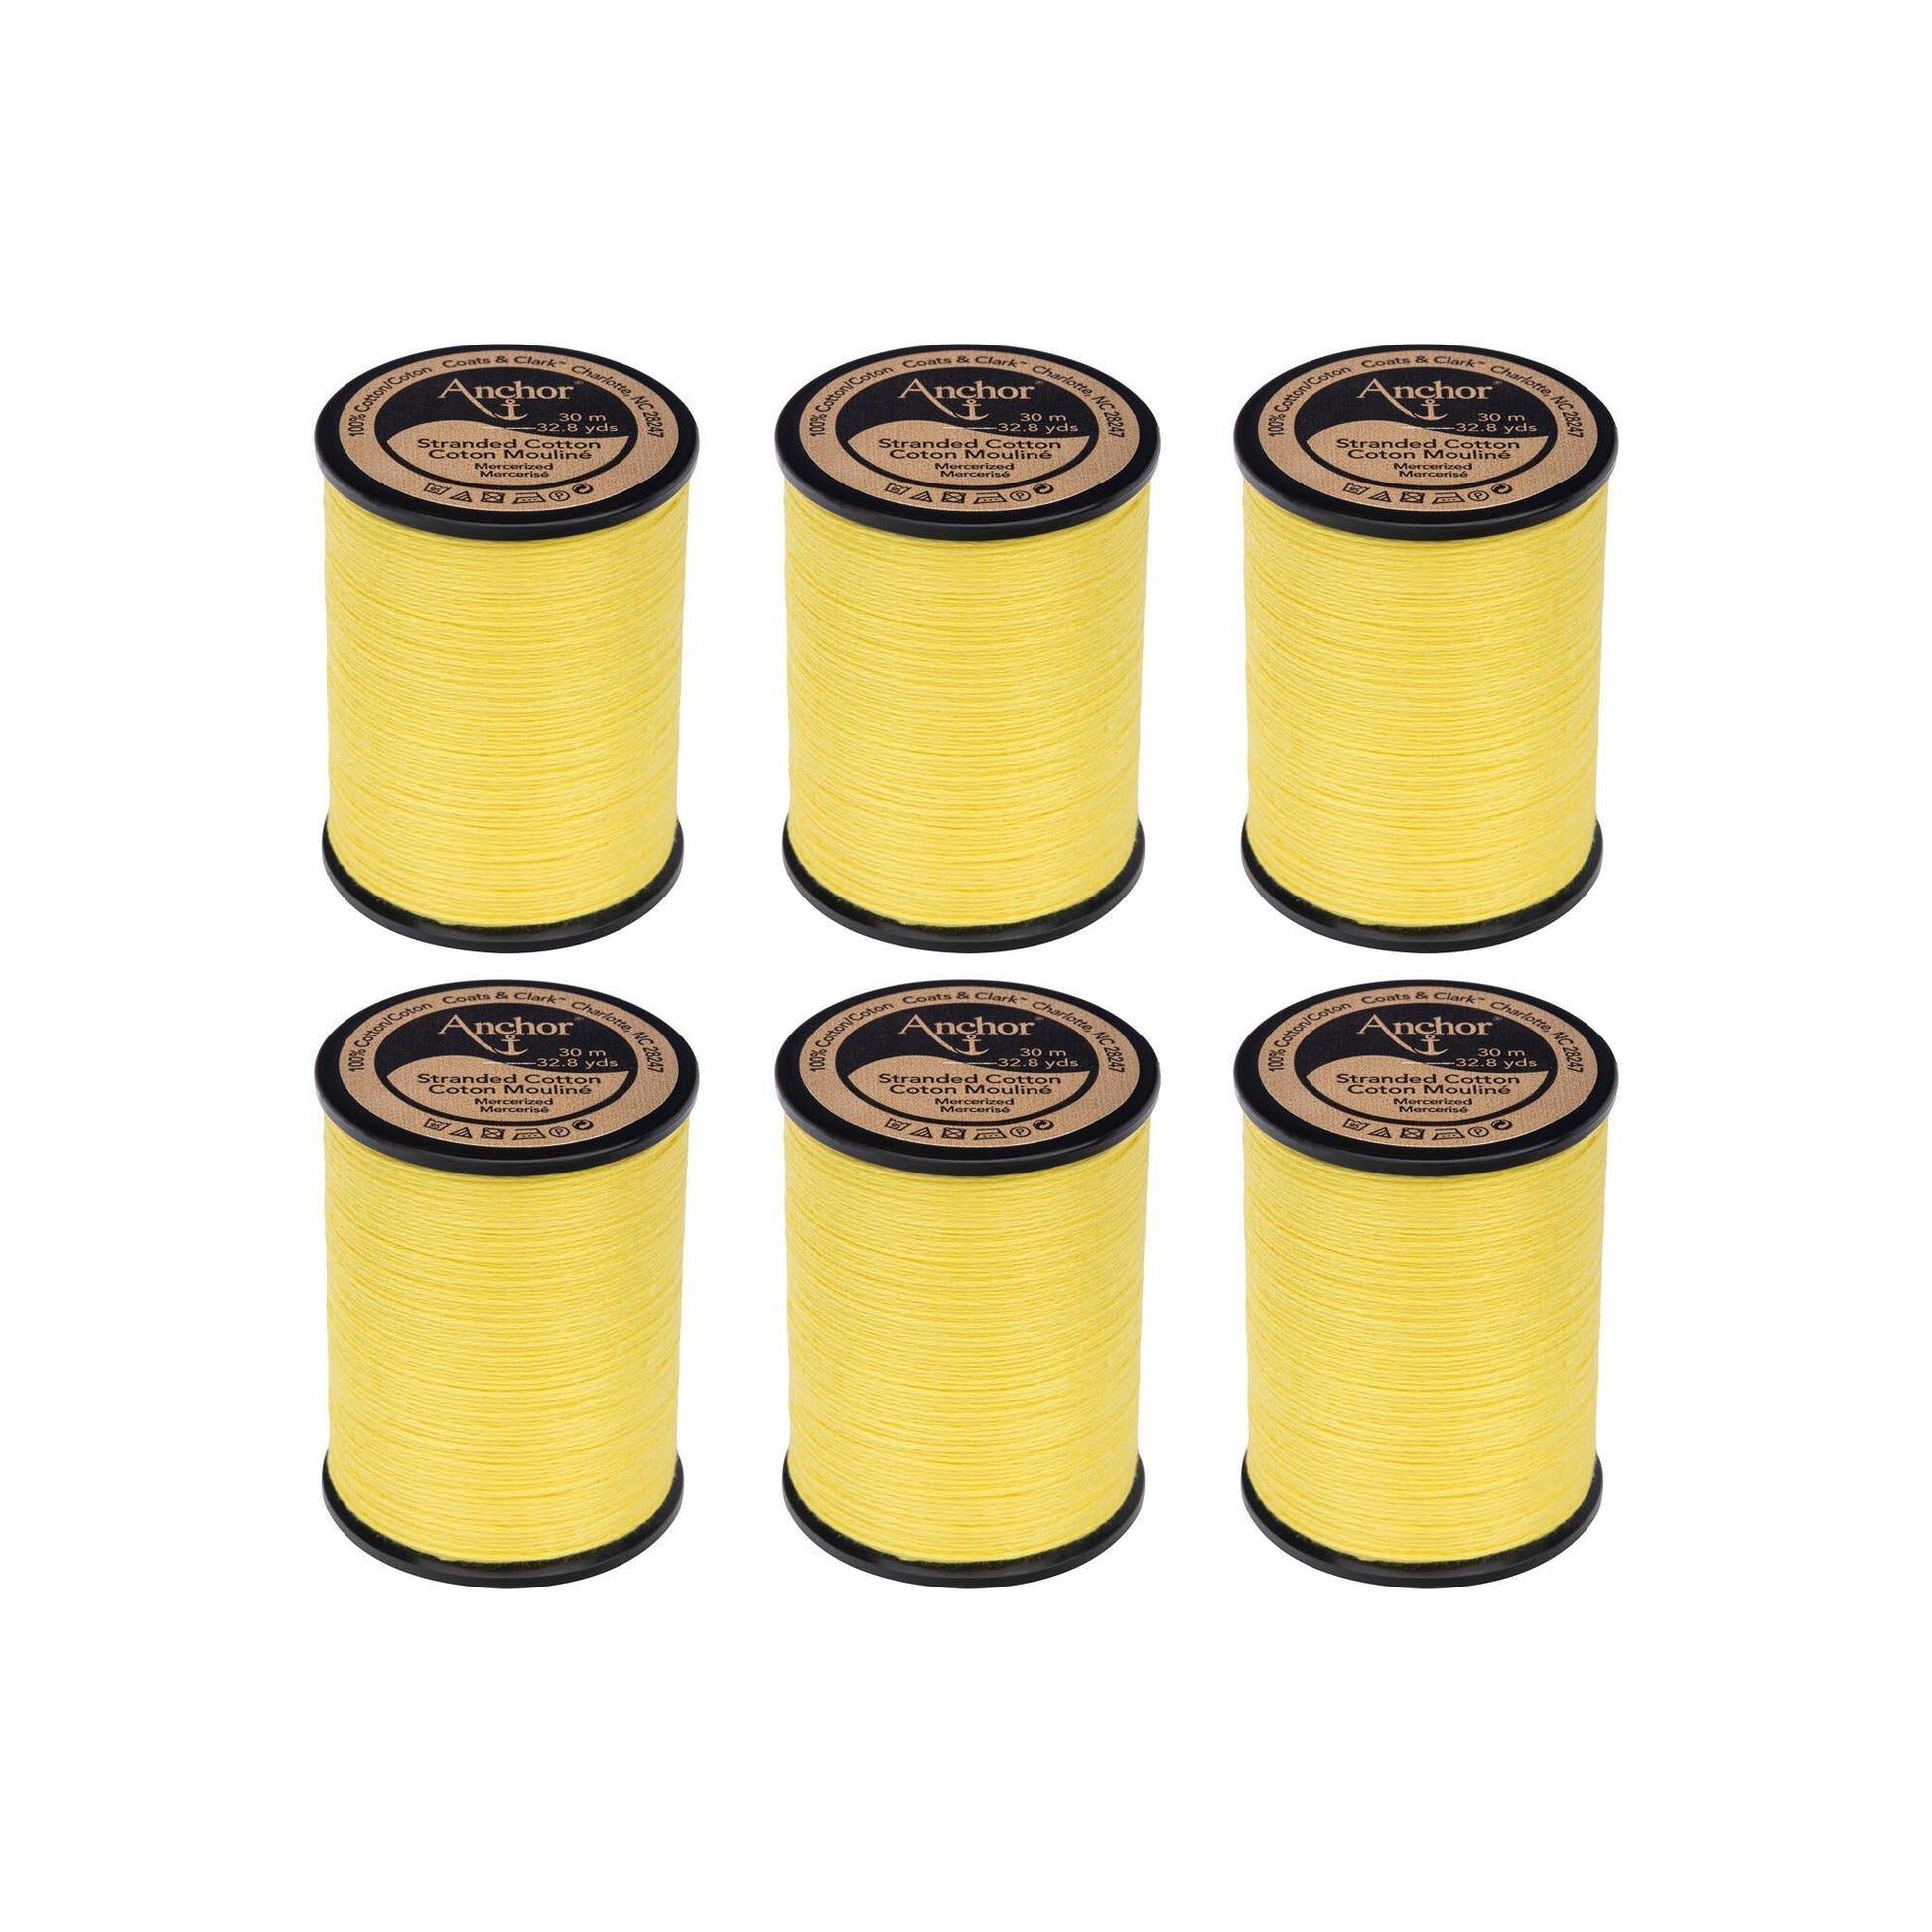 Anchor Spooled Cotton 30 Meters (6 Pack)